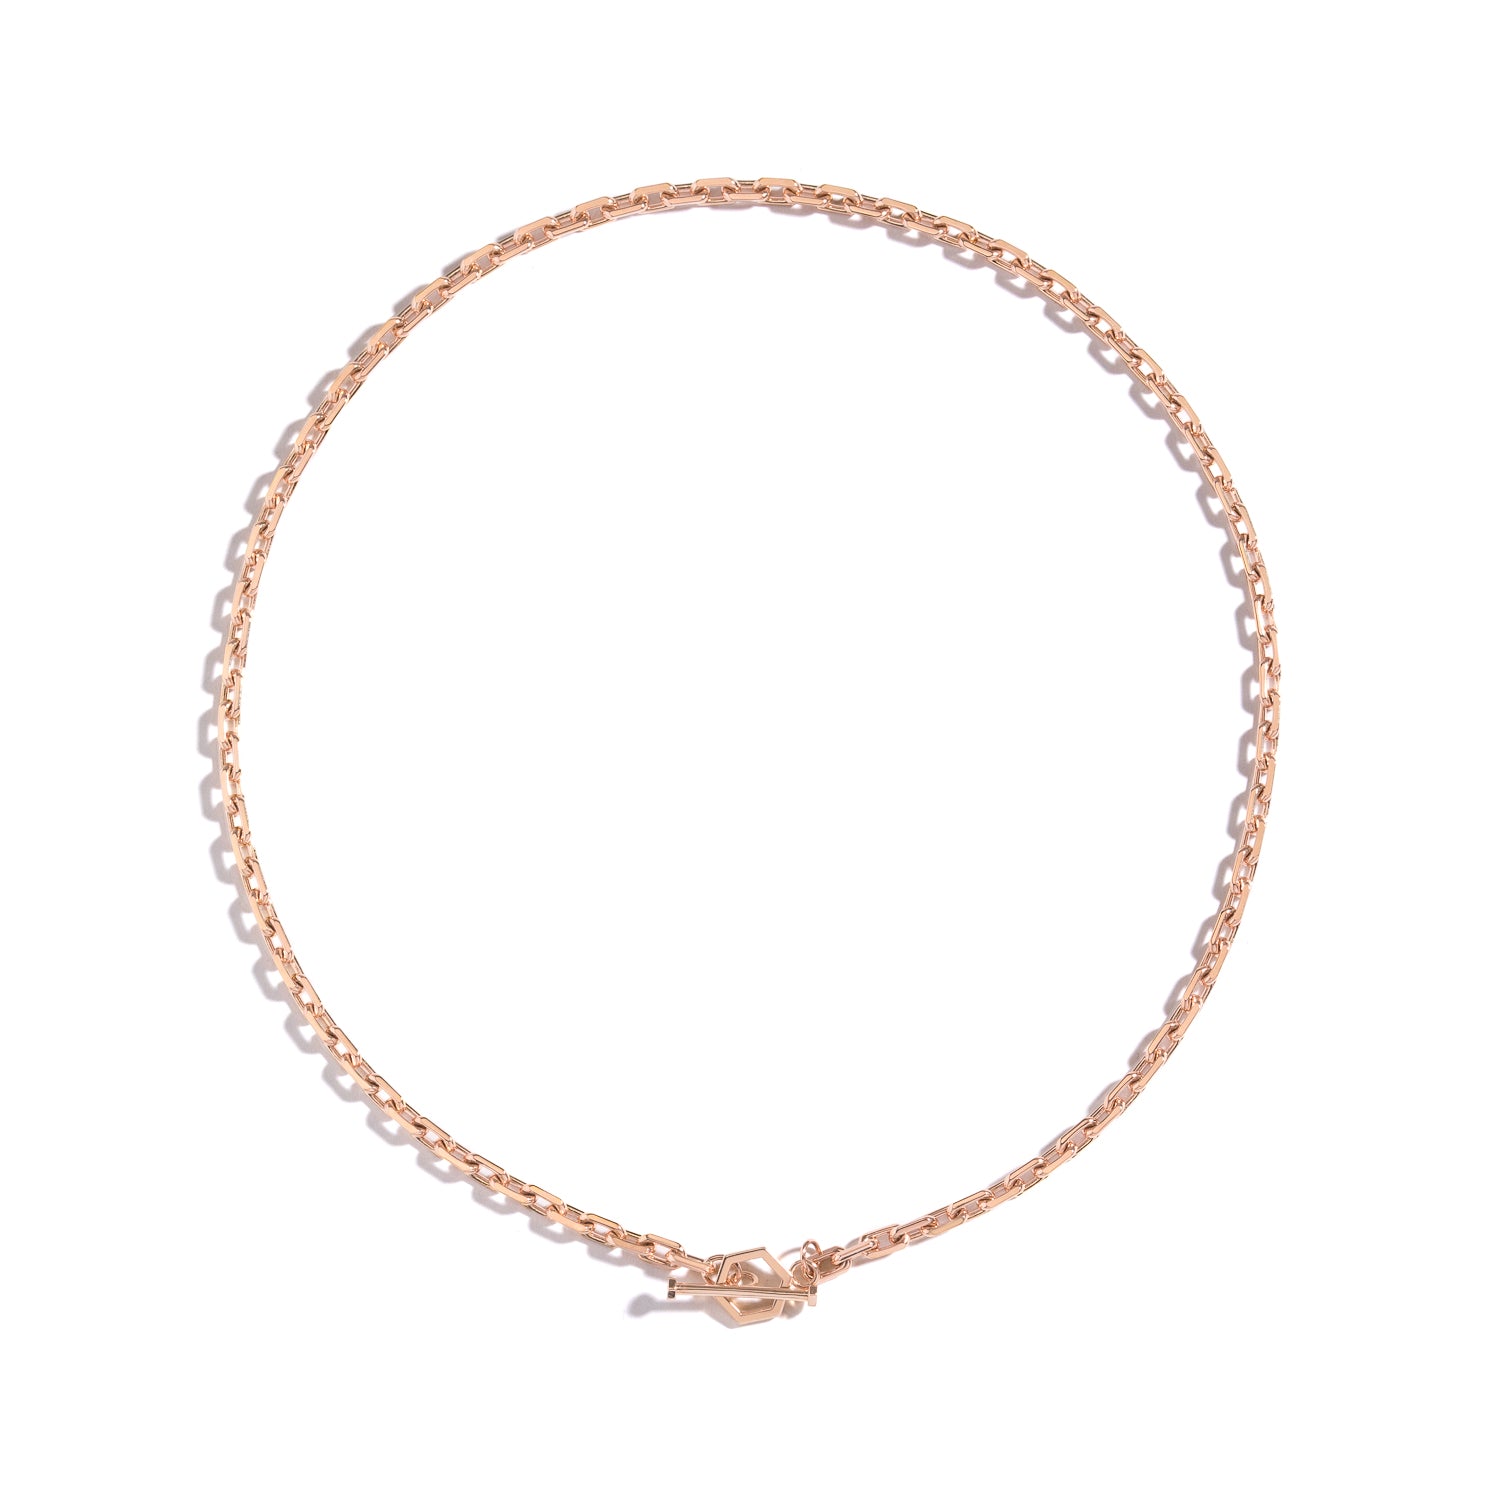 Shahla Karimi 4mm Toggle Chain 16" in Rose Gold.